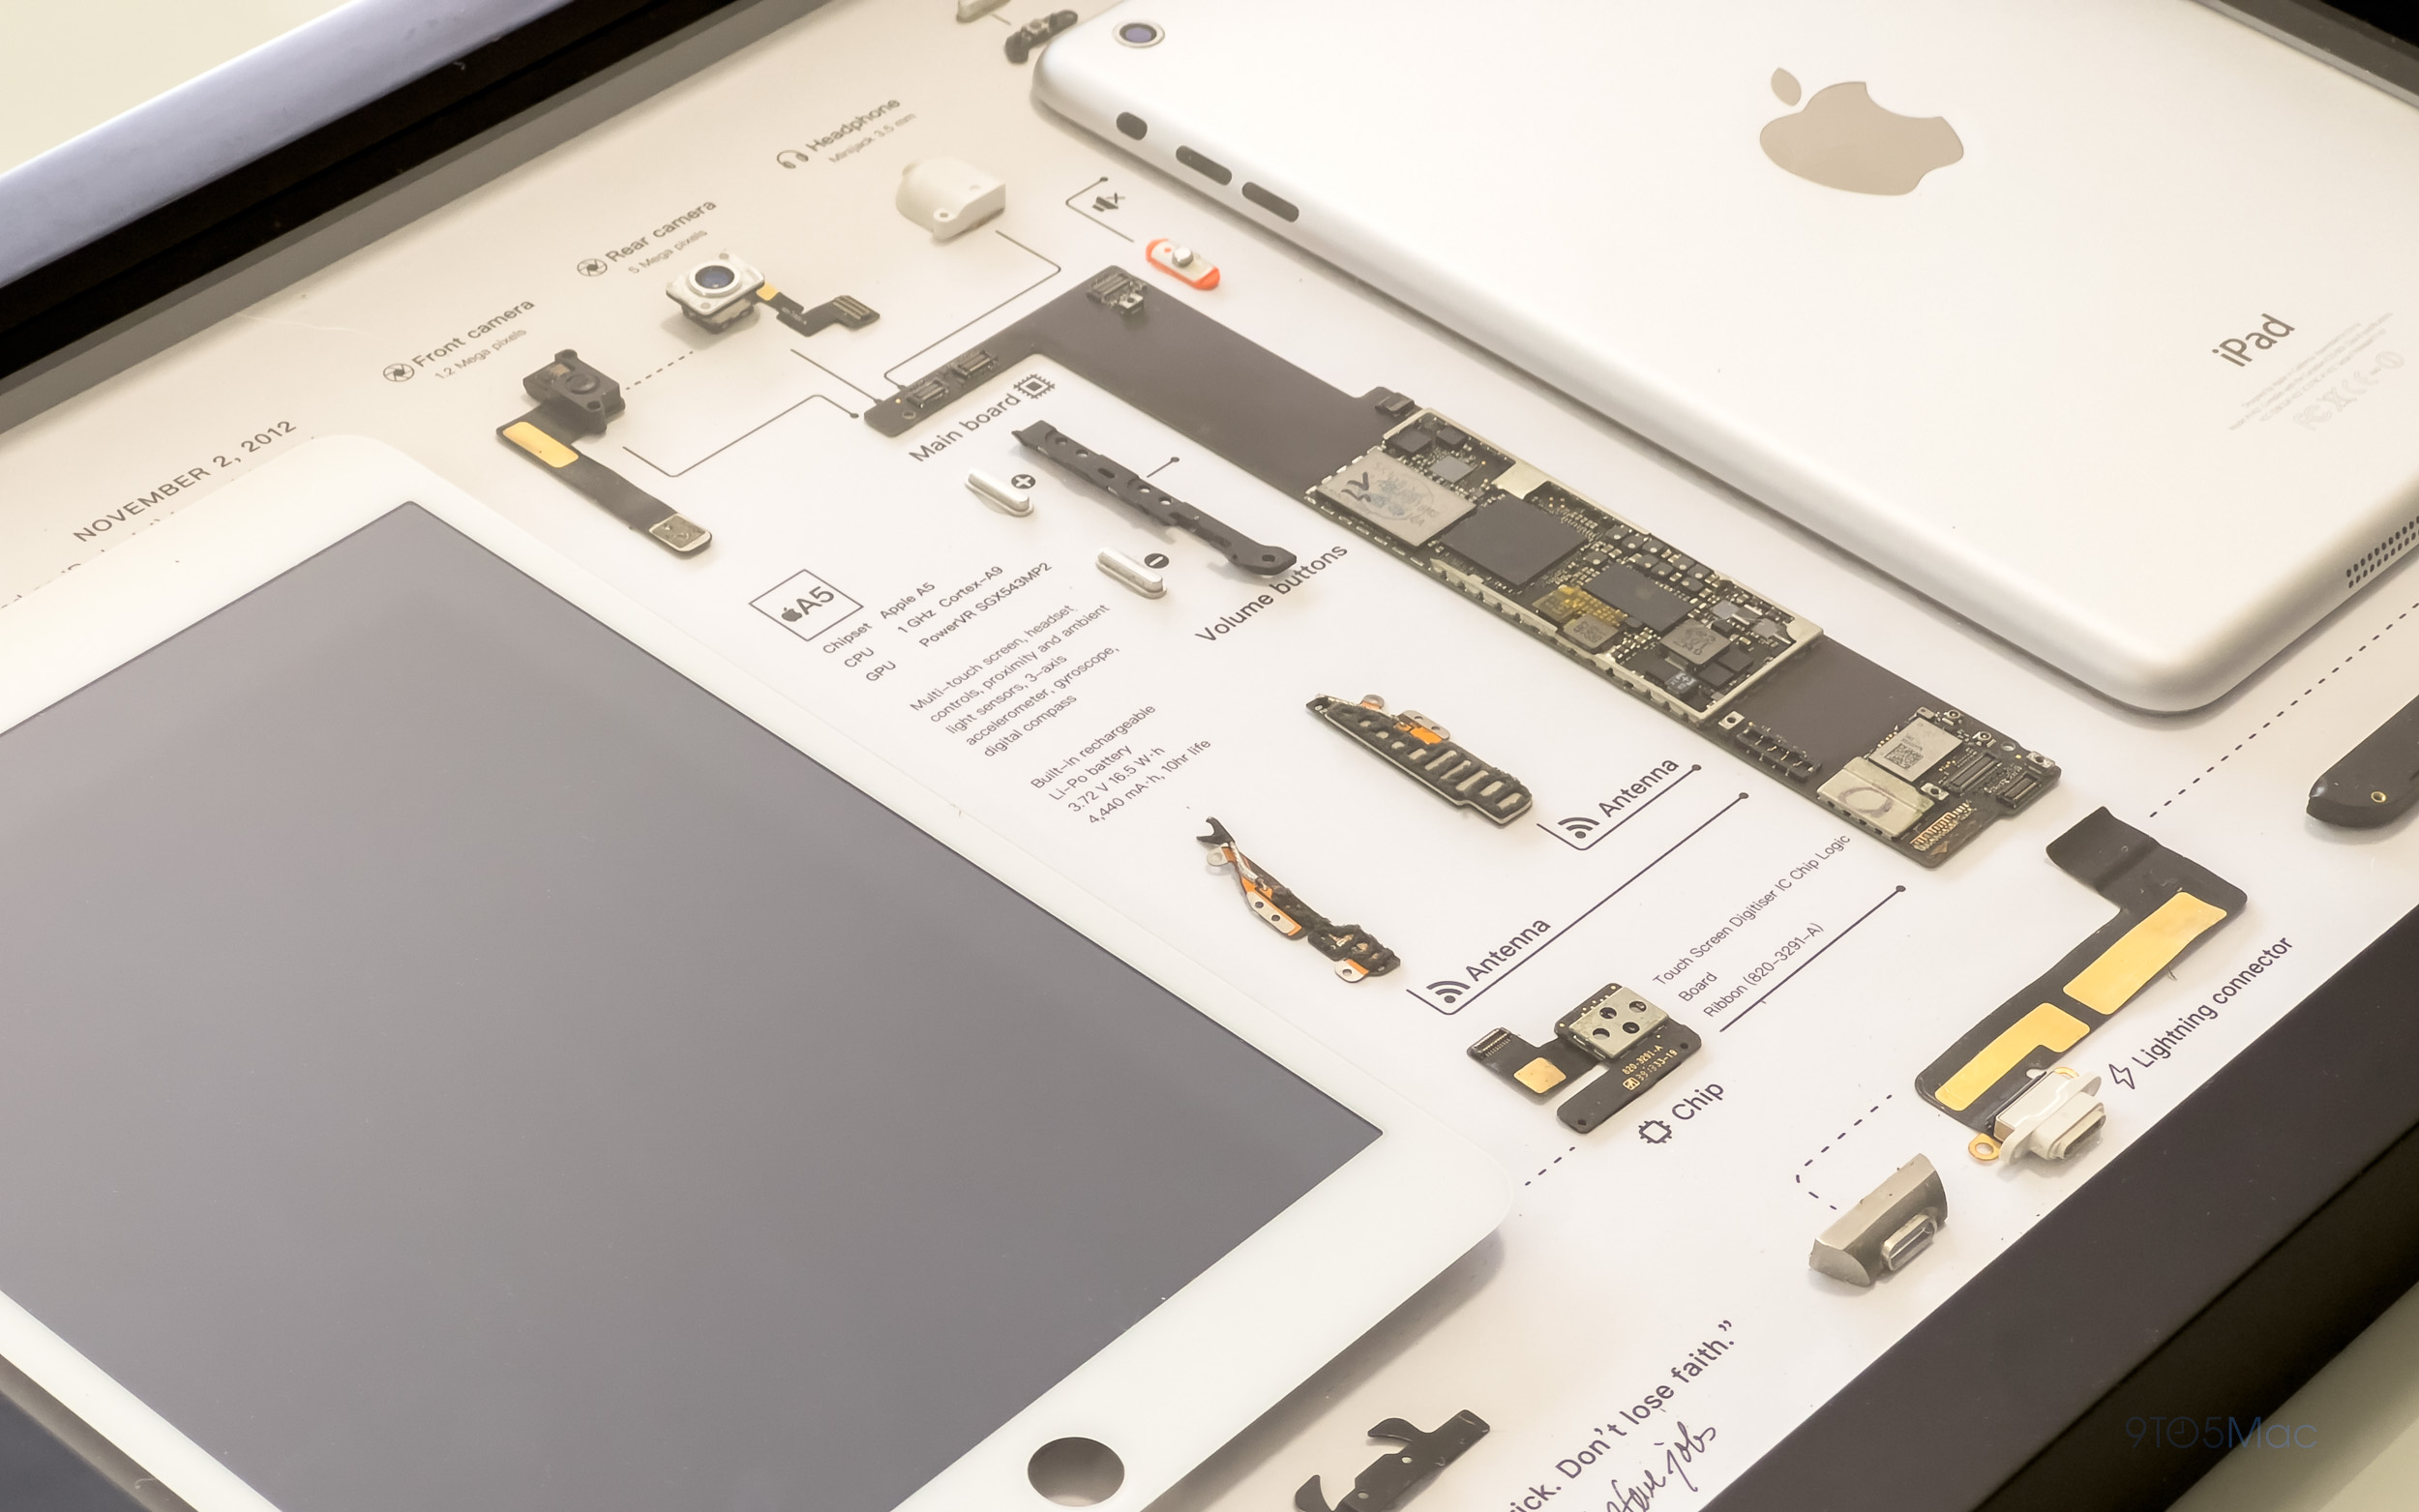 Here's a look at a first generation iPad mini taken apart and crafted by GRID